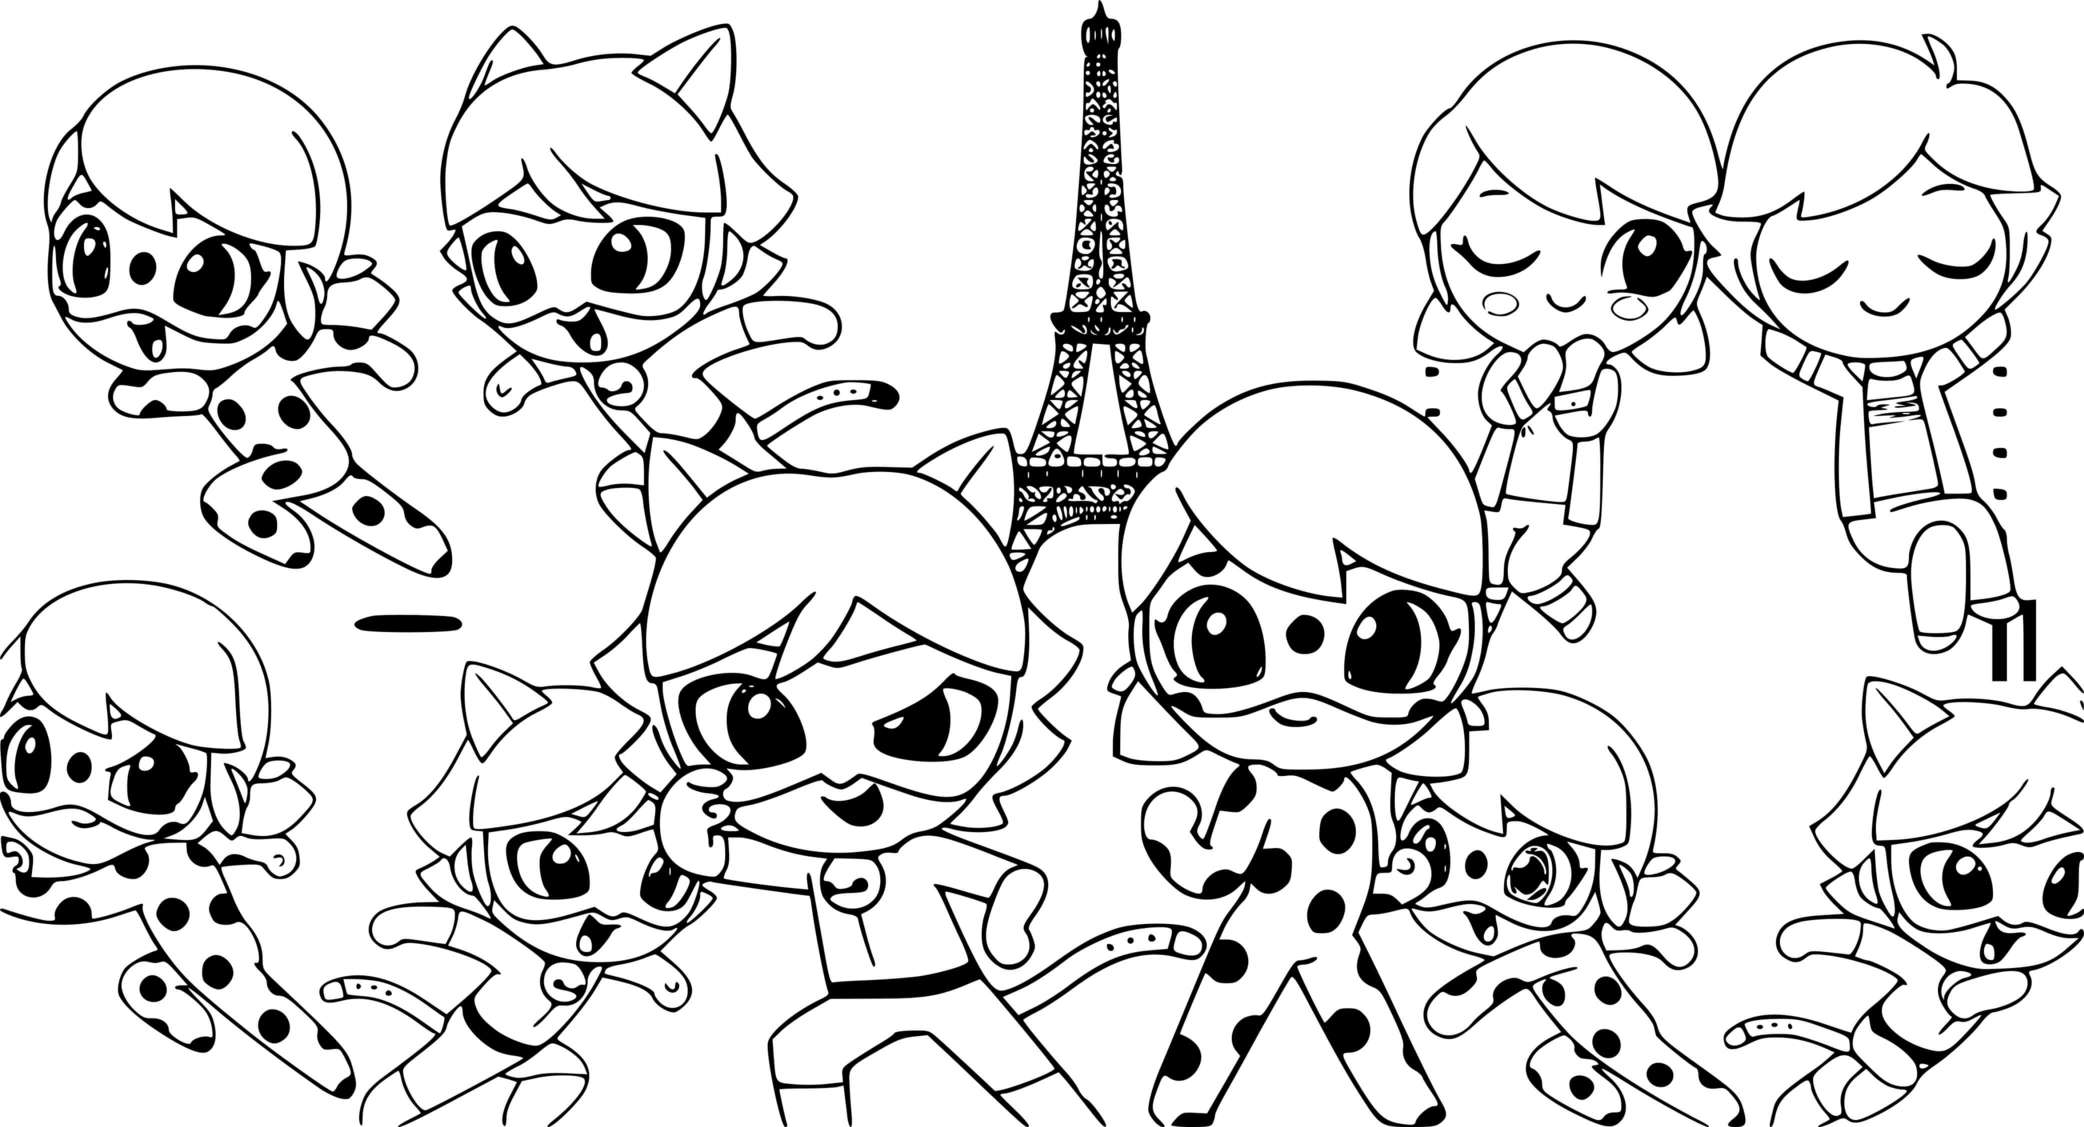 Cute Multimouse Chat Noir Kawaii Coloring Page